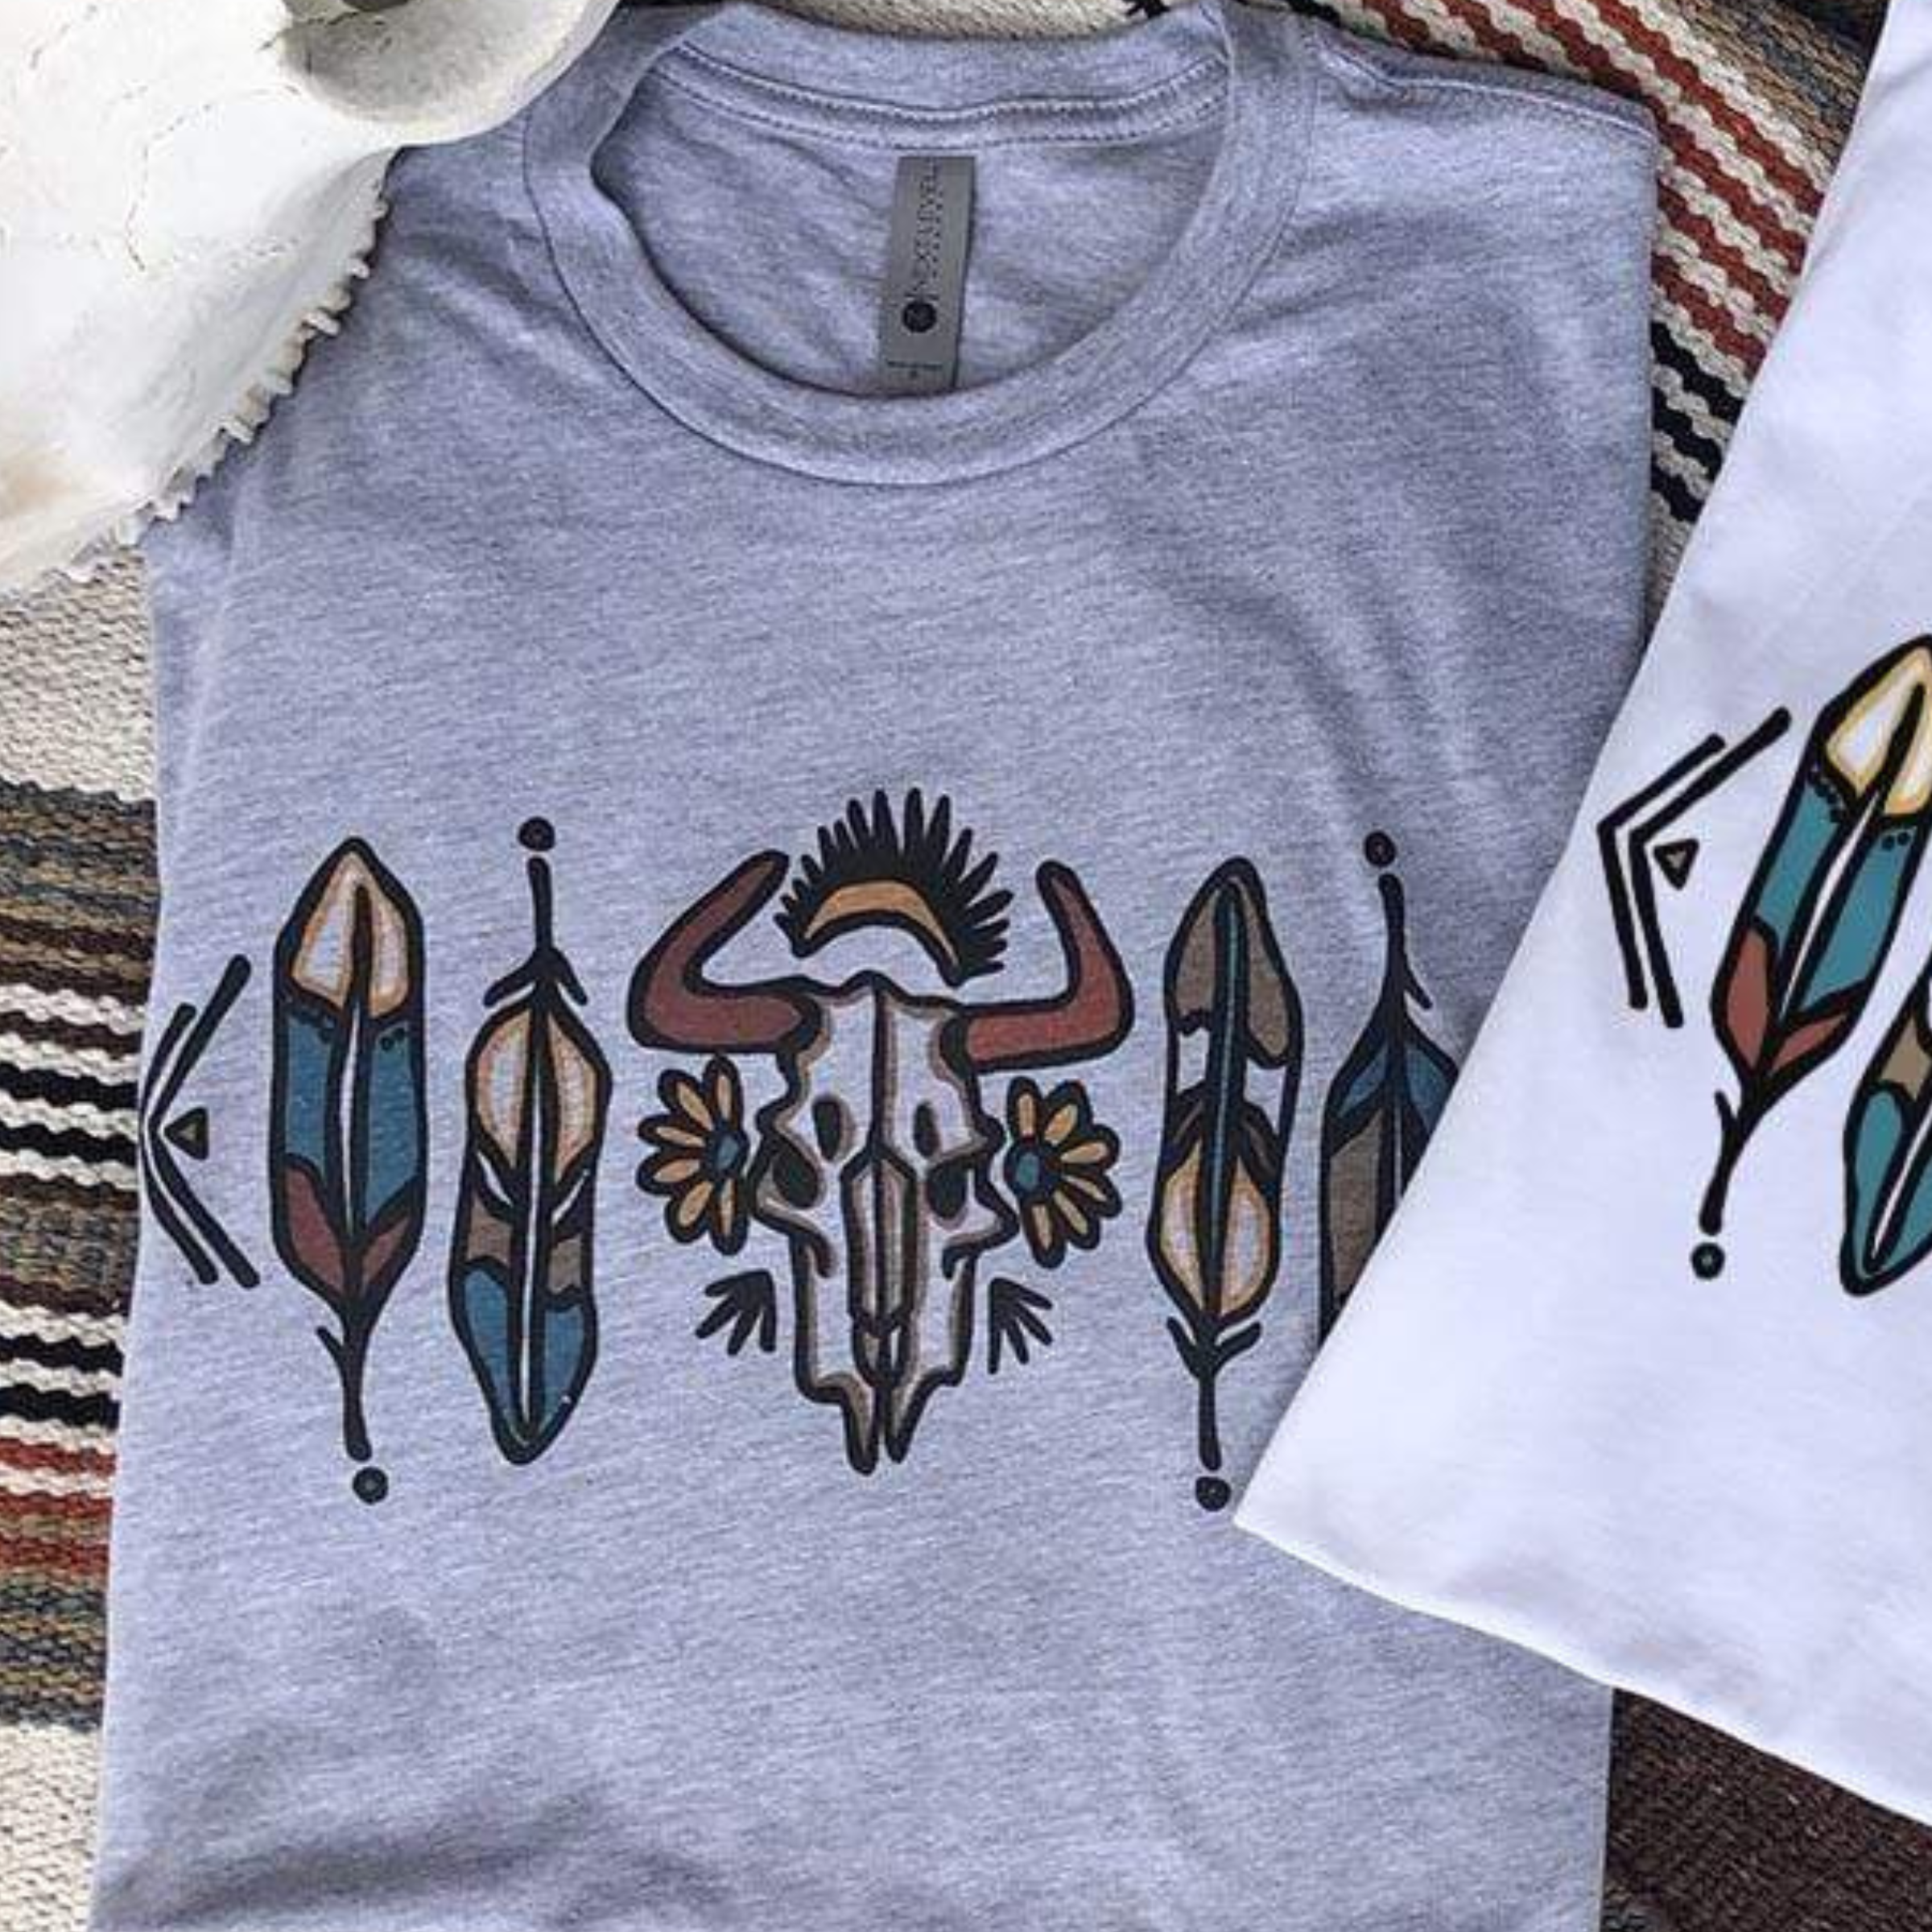 This Bella + Canvas tee in Grey includes a crew neckline, short sleeves, and a cute hand drawn design of a cow skull with two florals on either side along with 2 detailed feathers on both sides of the skull. The feathers include the following colors: blue, cream, dark green, and rust red.